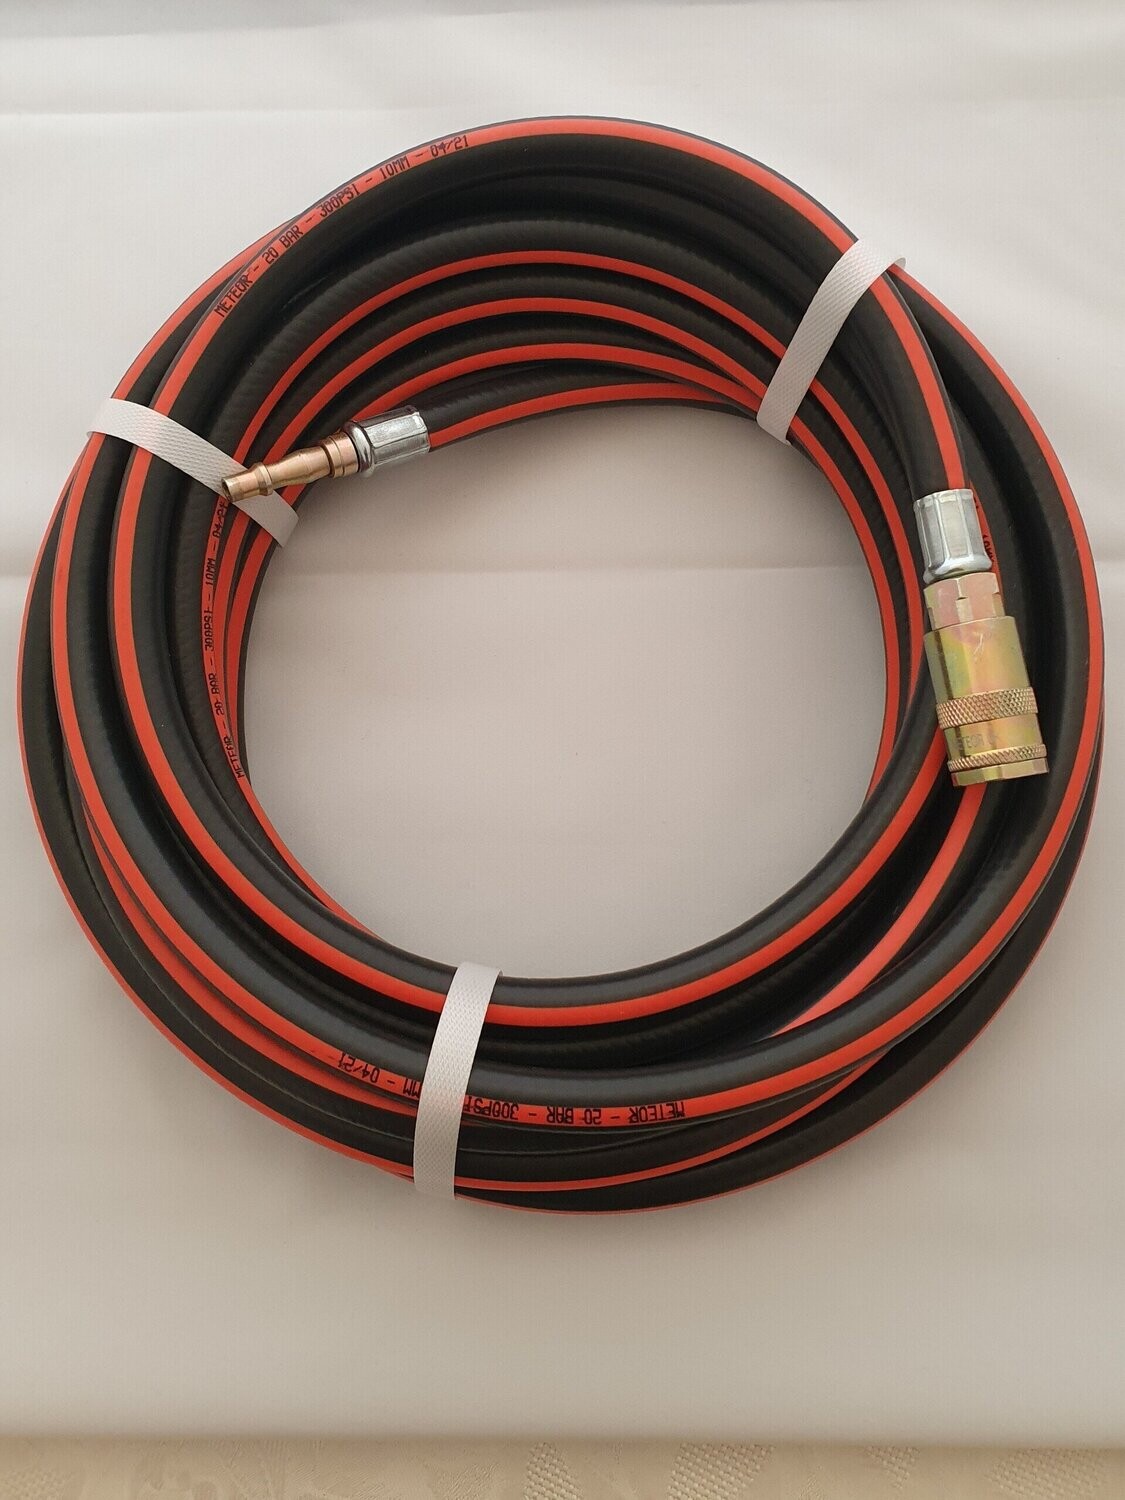 Meteor Hose Assembly 15 mtrs x 10mm (3/8") hose with coupling and adaptor fitted